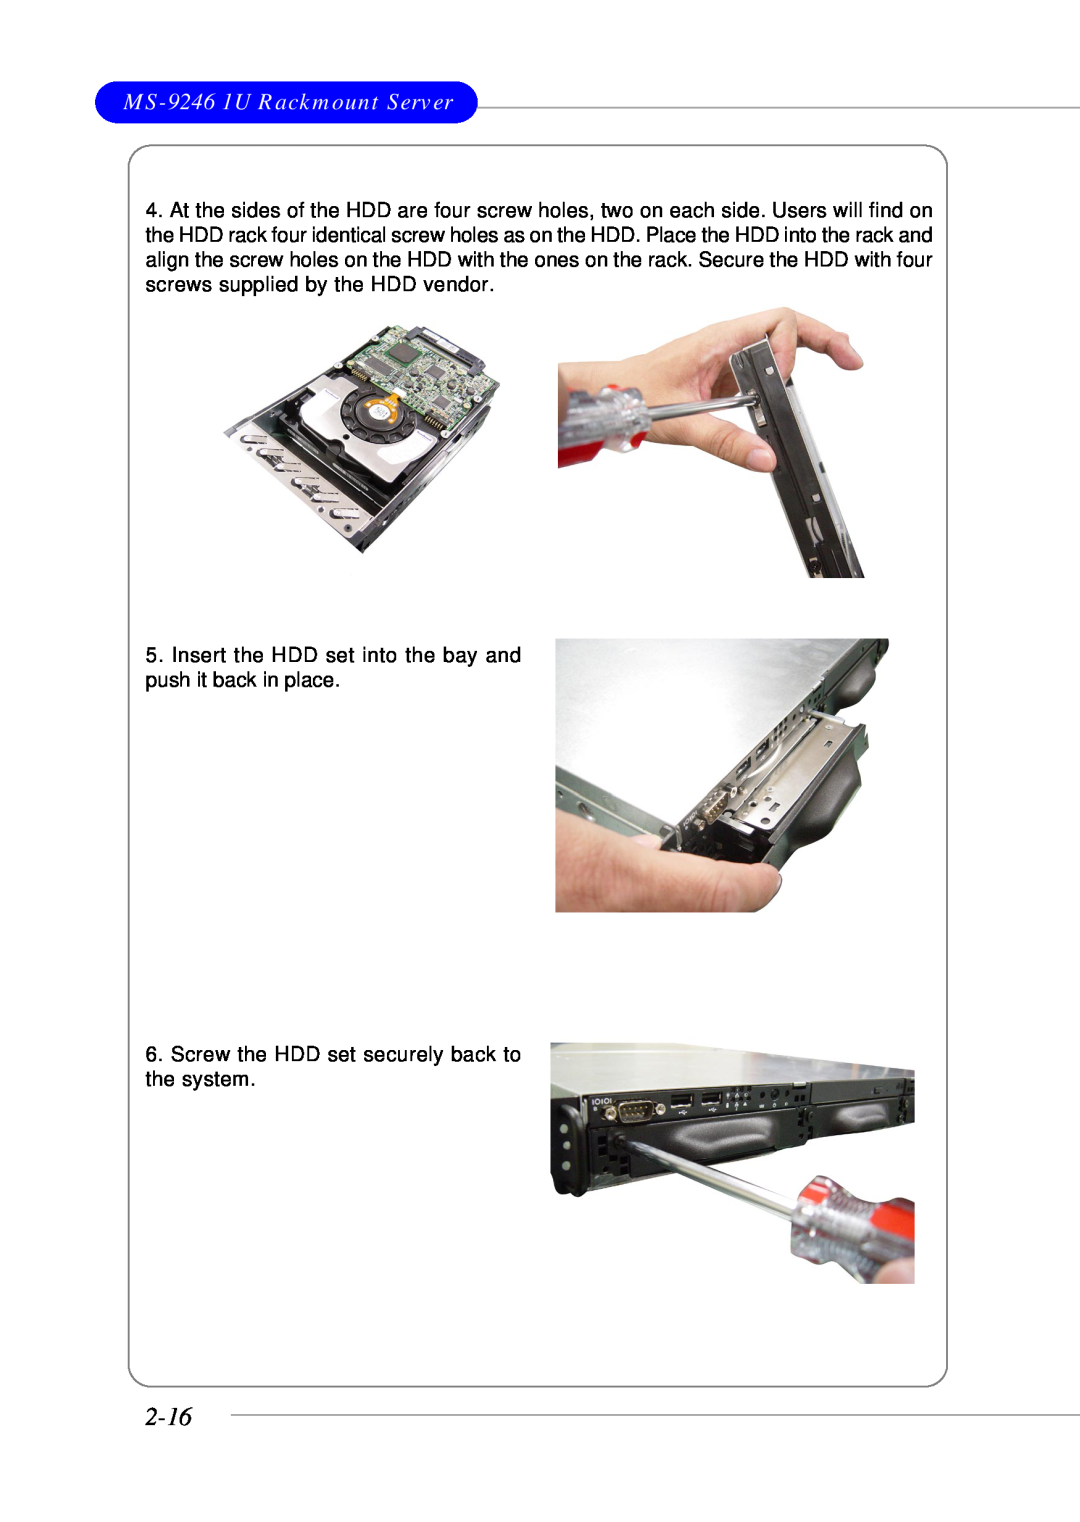 MSI manual 2-16, MS-9246 1U Rackmount Server, Insert the HDD set into the bay and push it back in place 